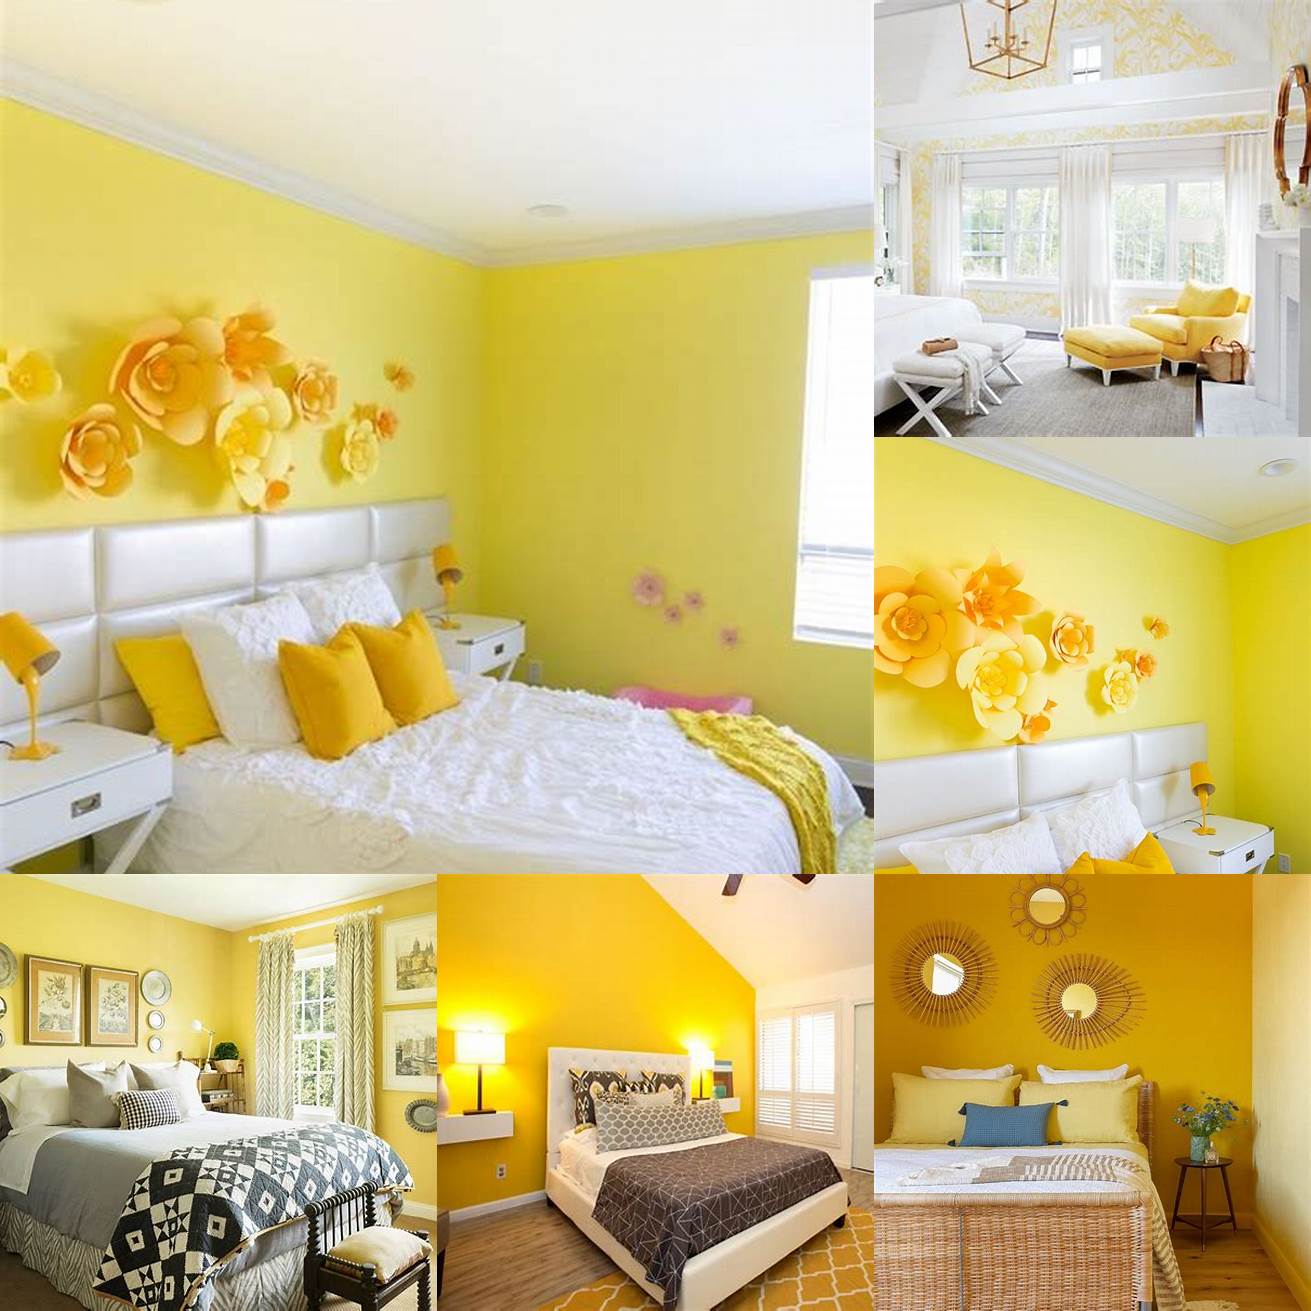 A bright yellow bedroom can add energy and warmth to your space